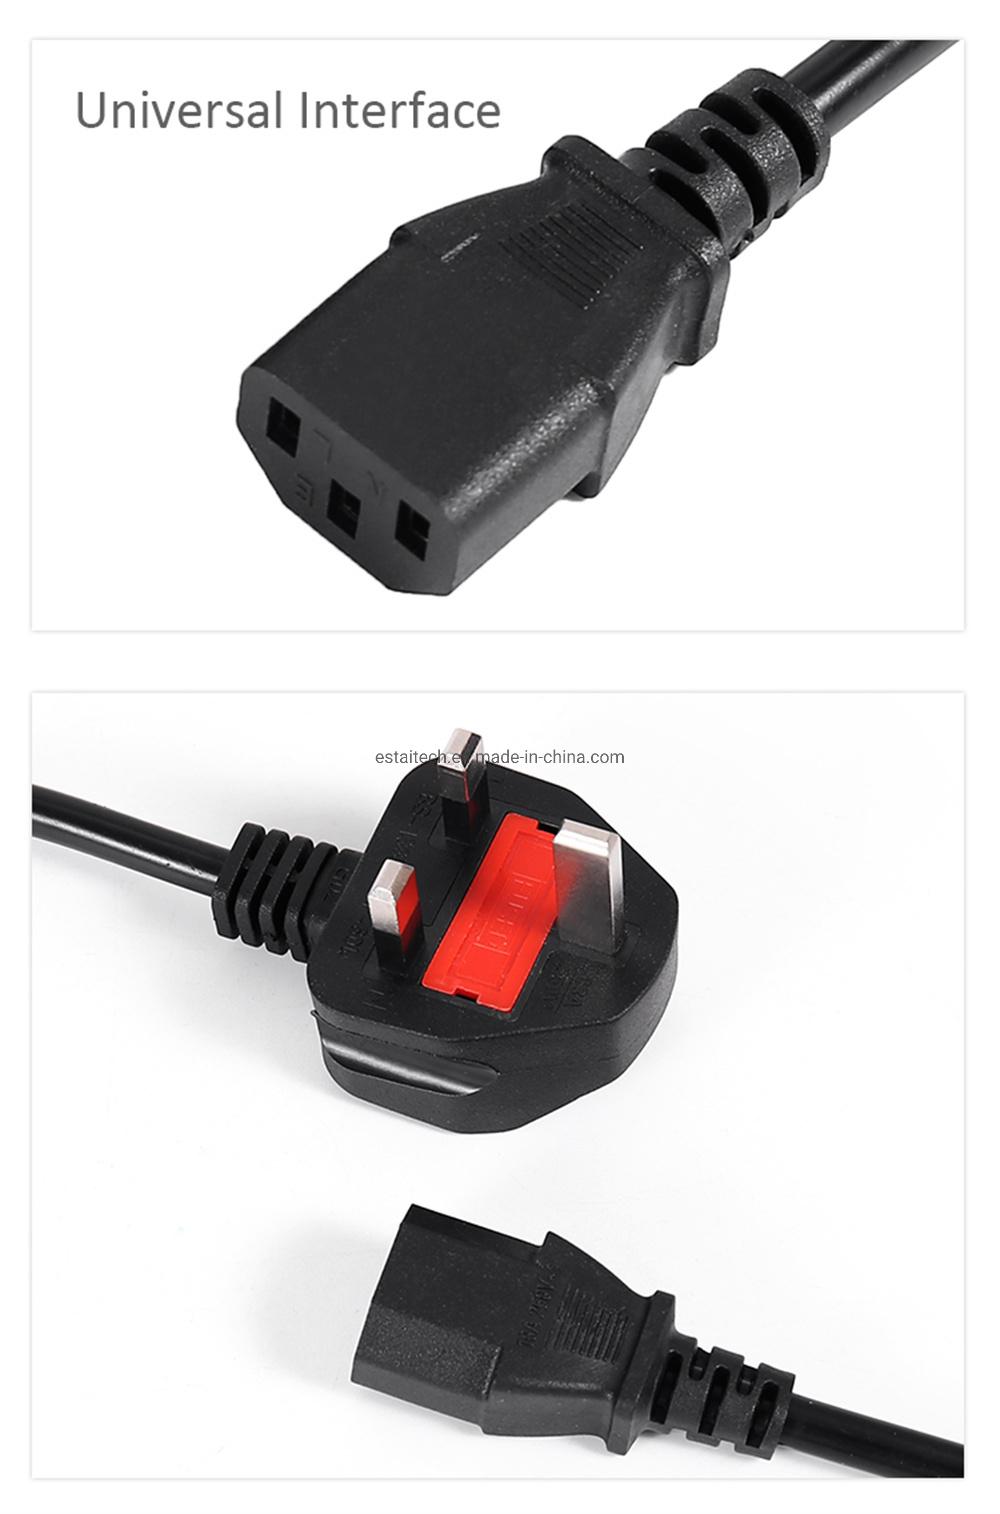 China Factory Direct Sales 3p Plug to Angle IEC C13 UK Power Lead AC Power Cords